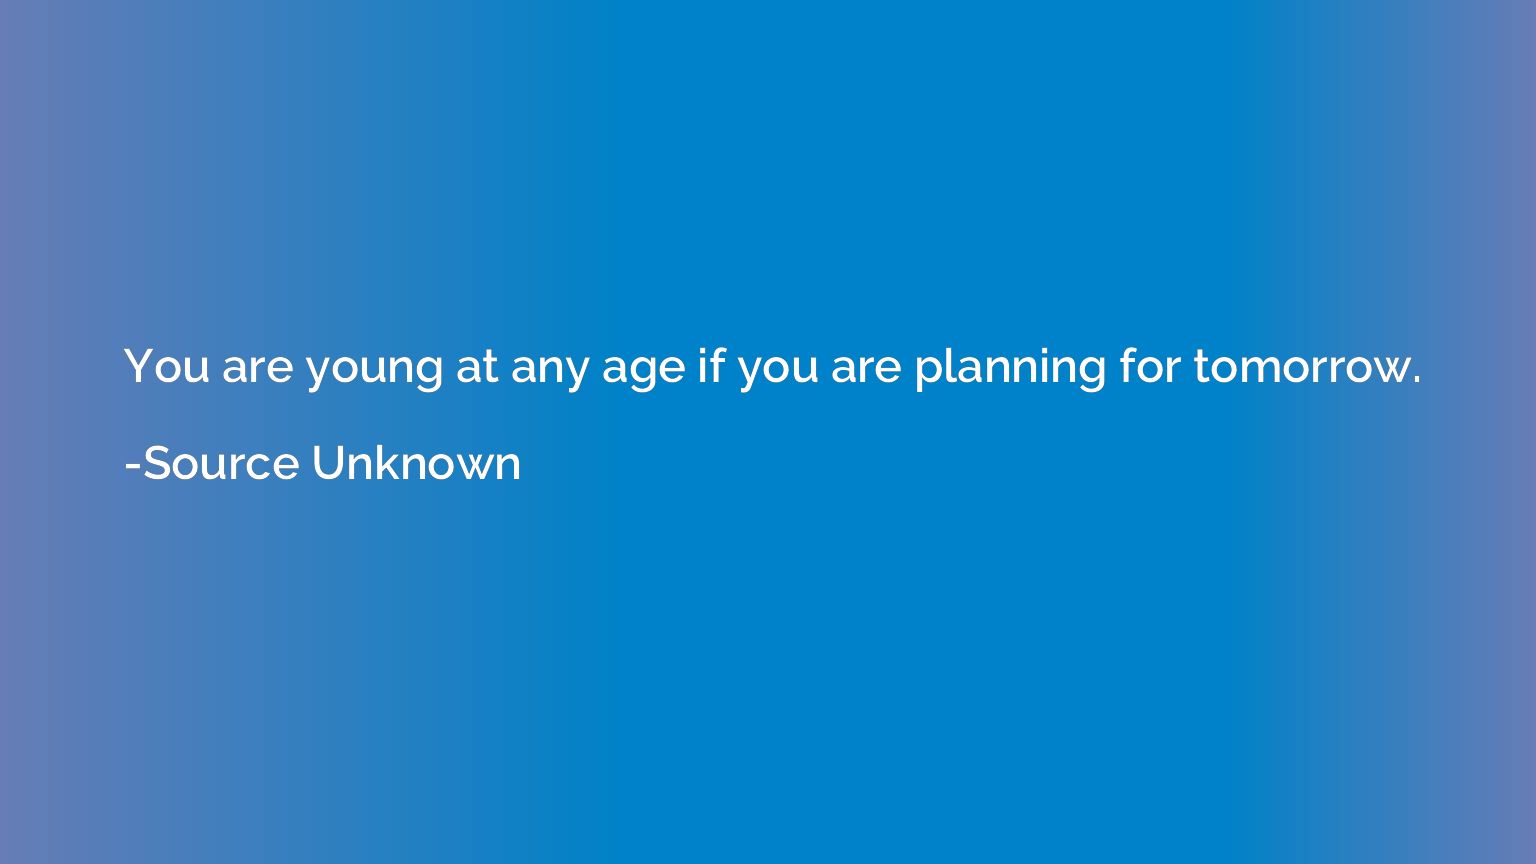 You are young at any age if you are planning for tomorrow.